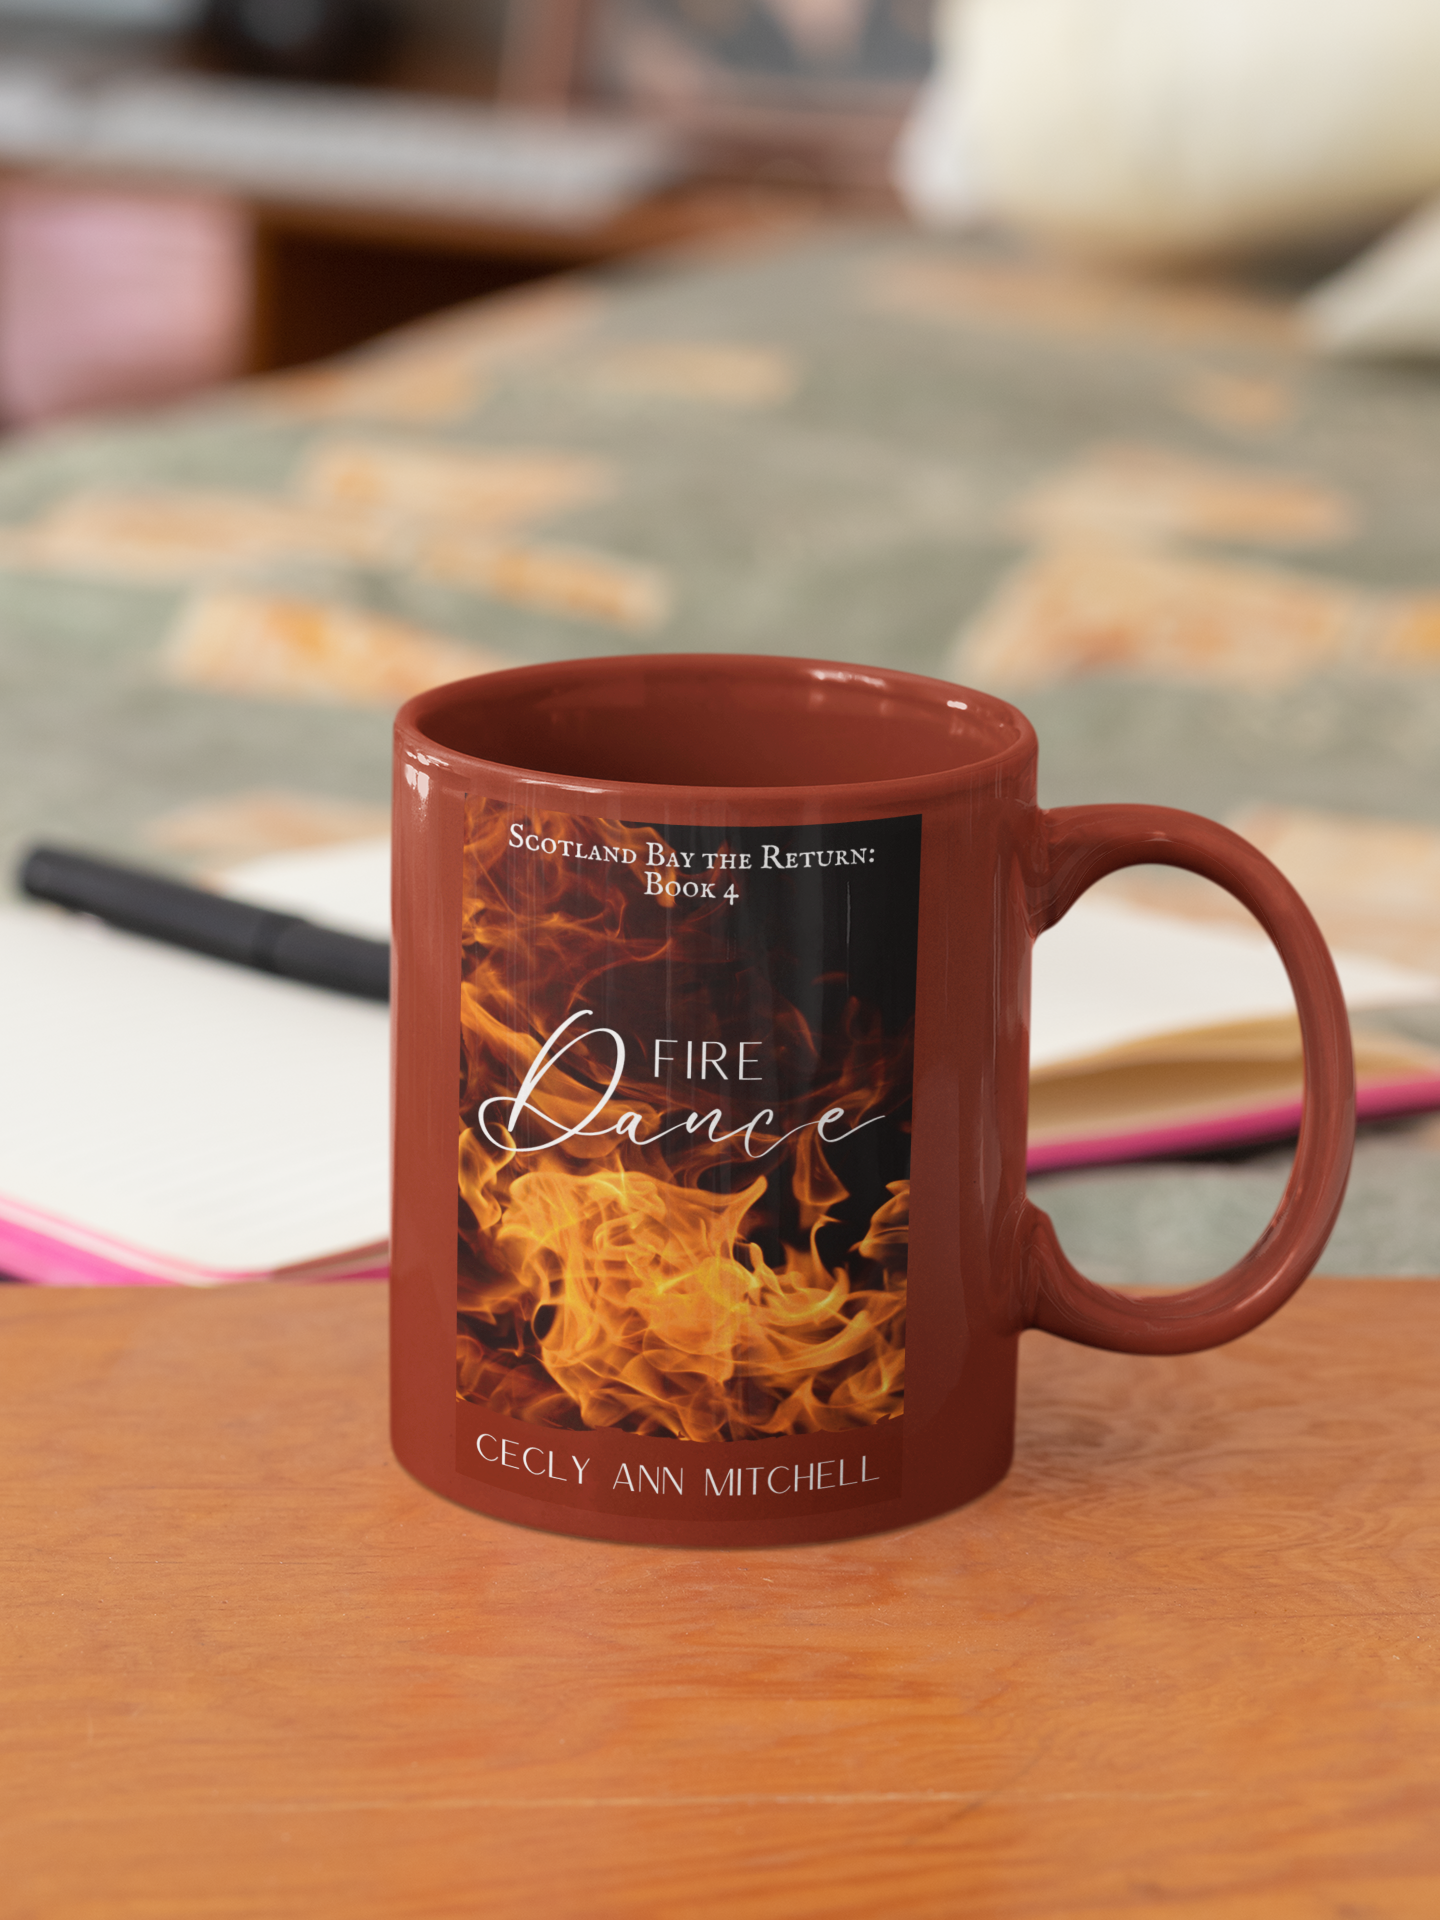 Lord of the Rings mug: And that must be you